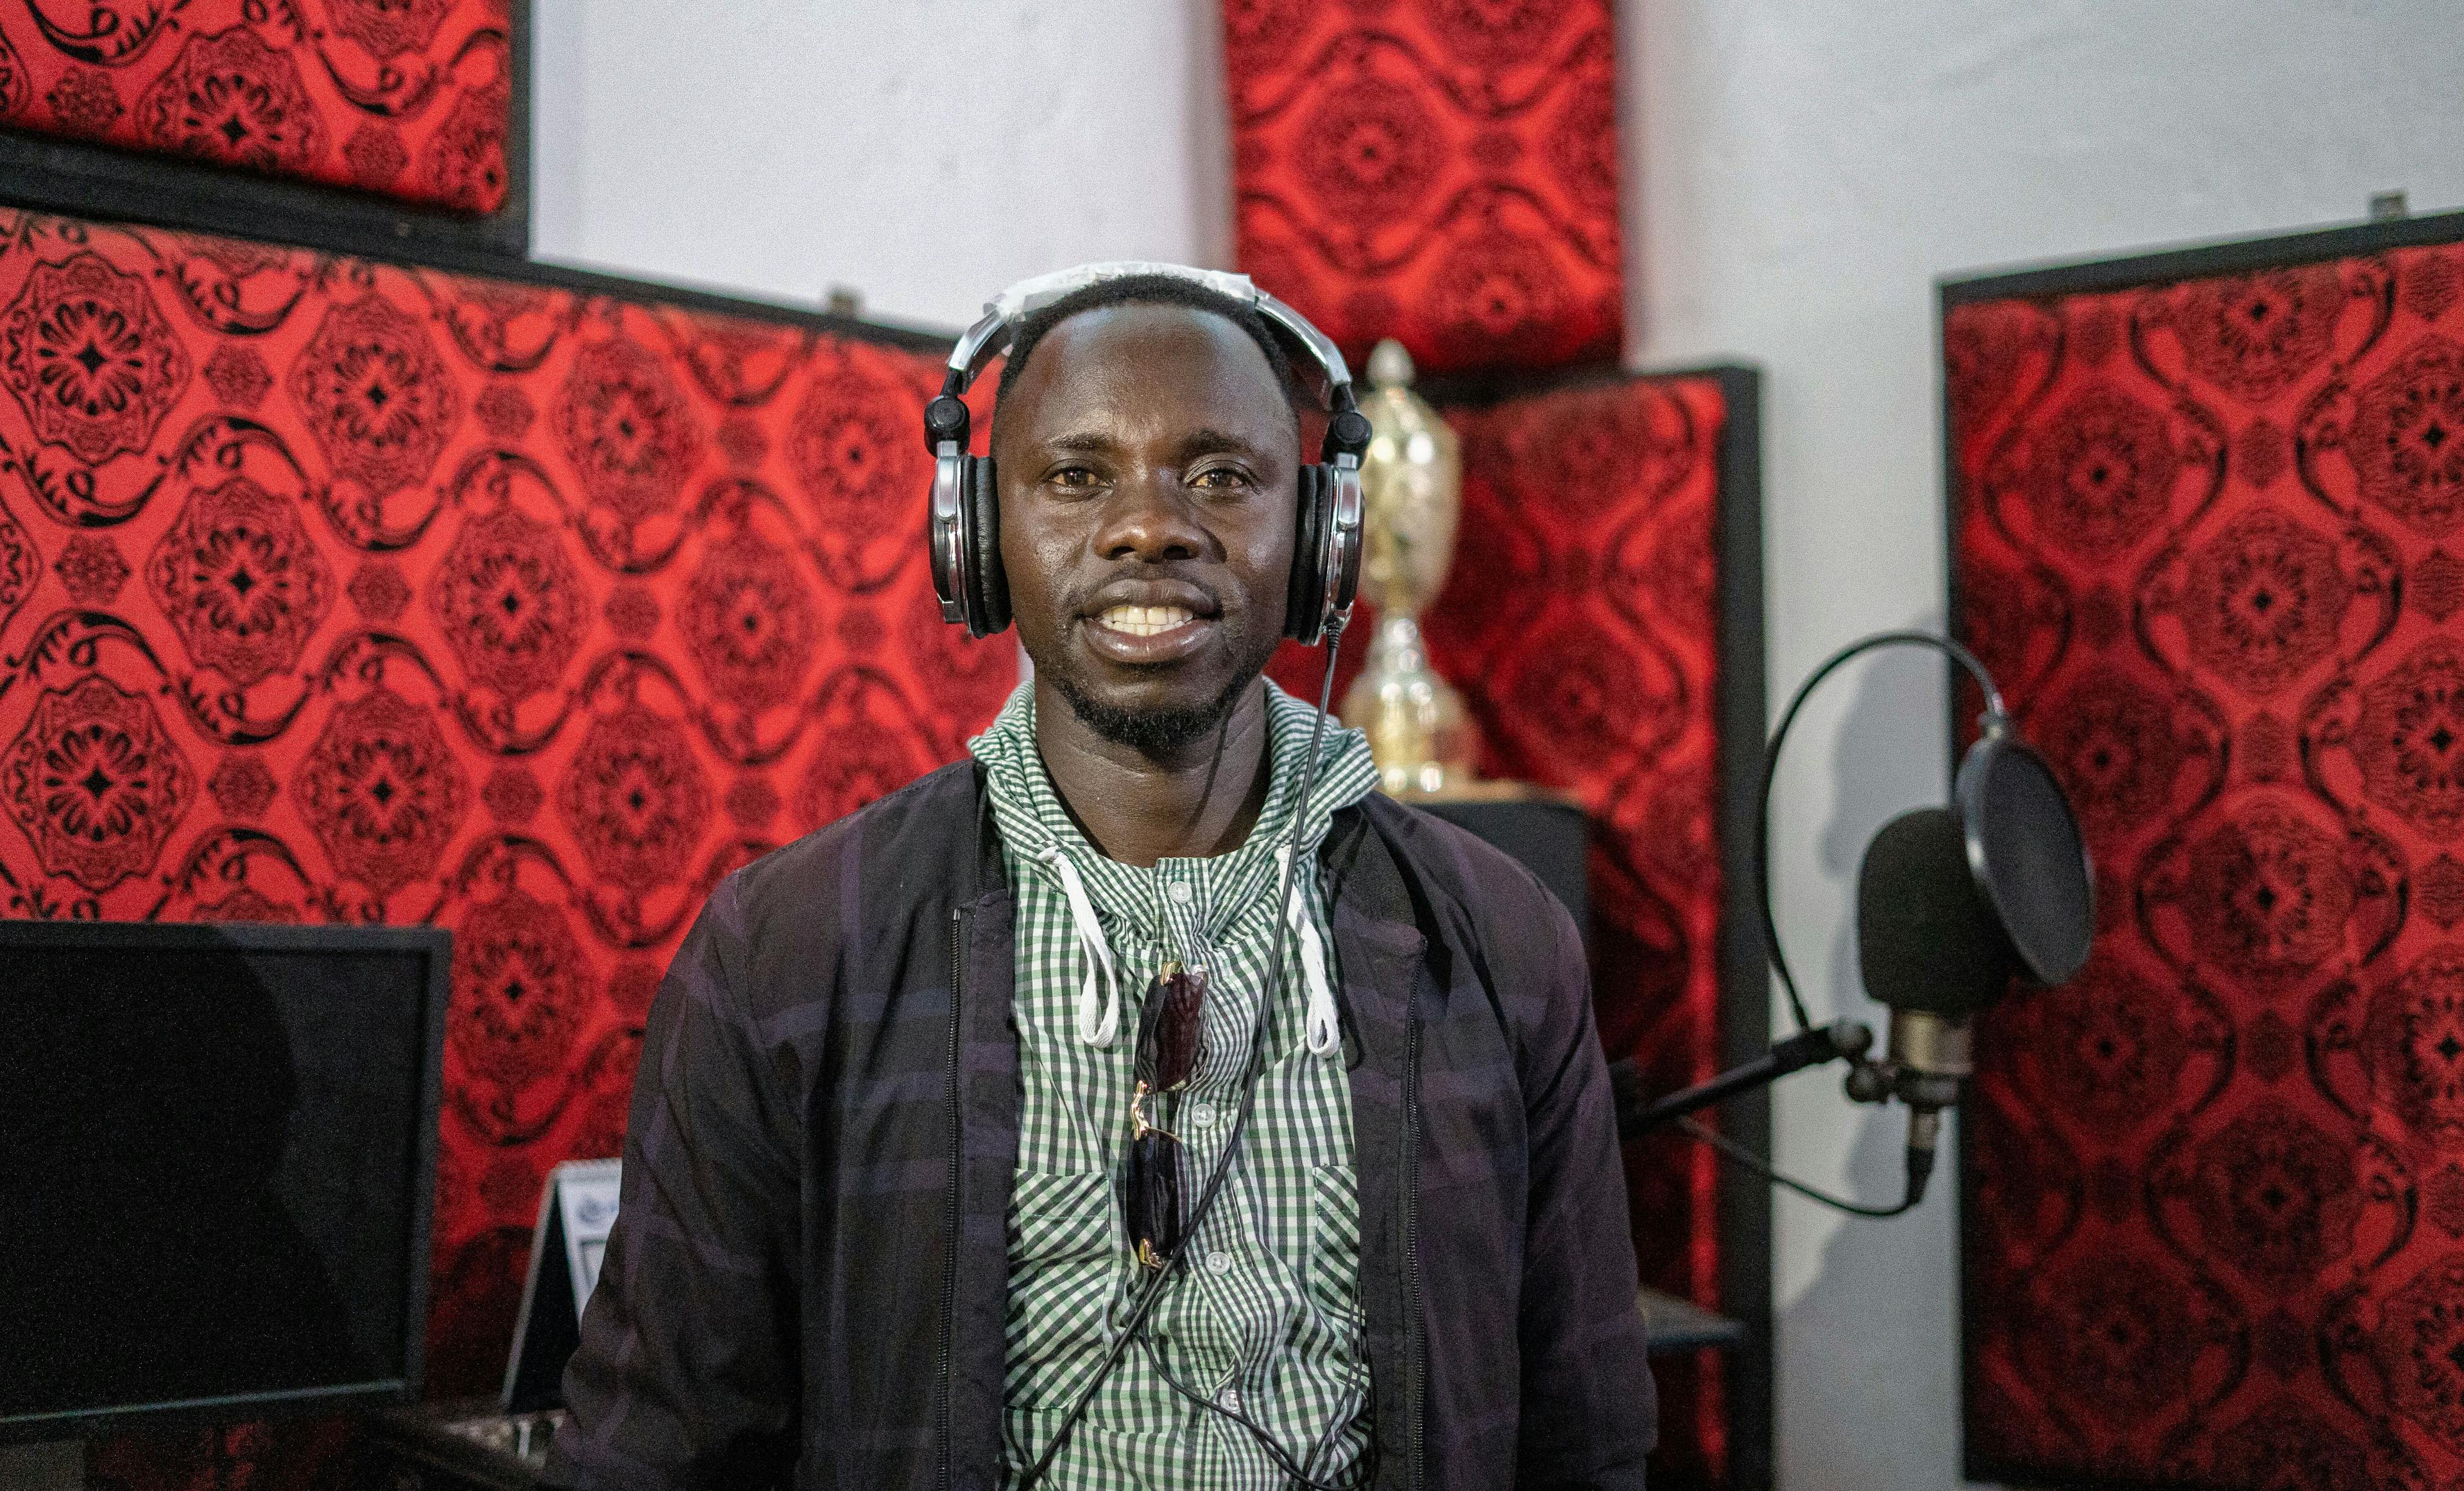 It’s a gamble: cities have their own risks, but it’s worth it. Moving to the city comes with its own climate-related risks — like flooding or heatwaves — but many are willing to pay this price because of the opportunities cities provide. Aspiring gospel singer Franco Anwangkani (26) is paying his way with casual work, while he works towards recording an album.